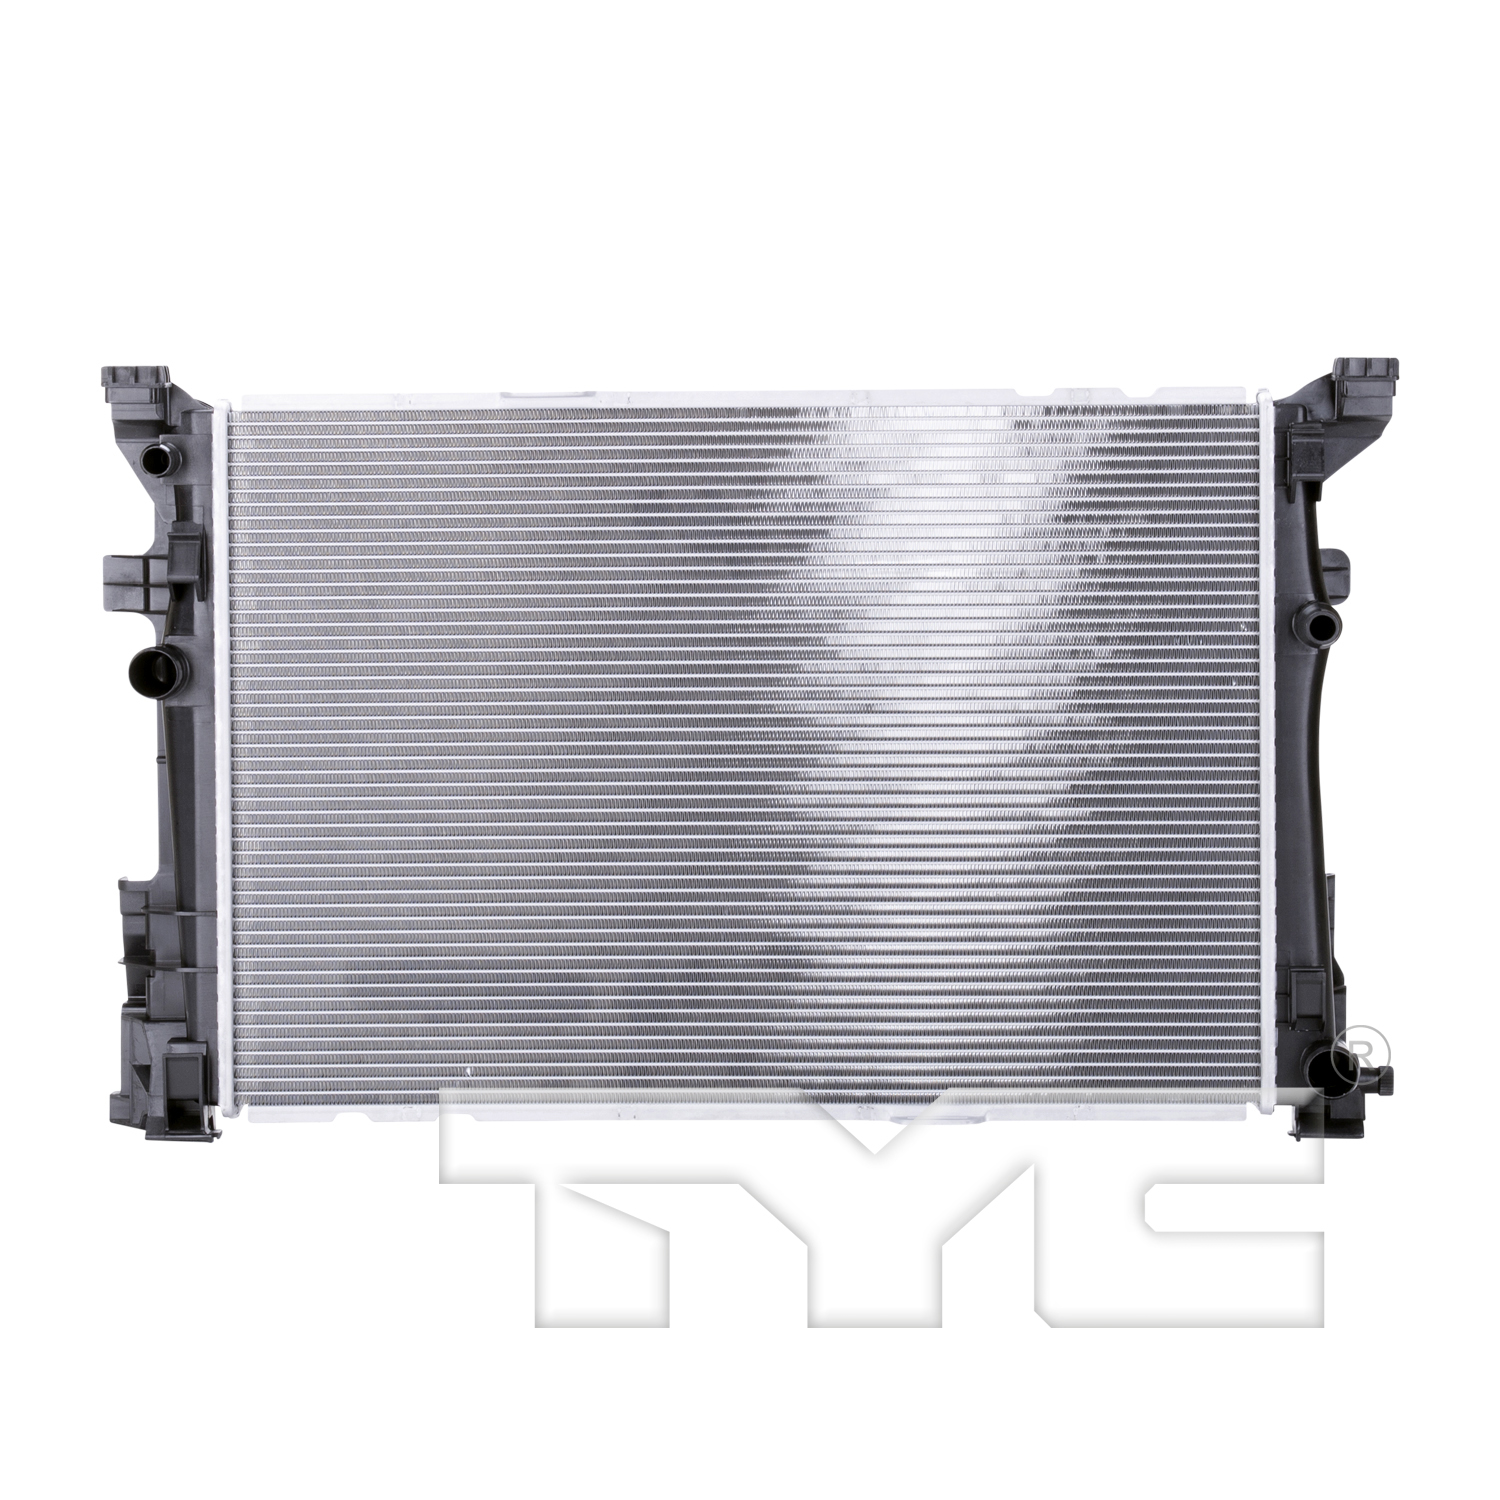 Aftermarket RADIATORS for MERCEDES-BENZ - CLA250, CLA250,14-19,Radiator assembly